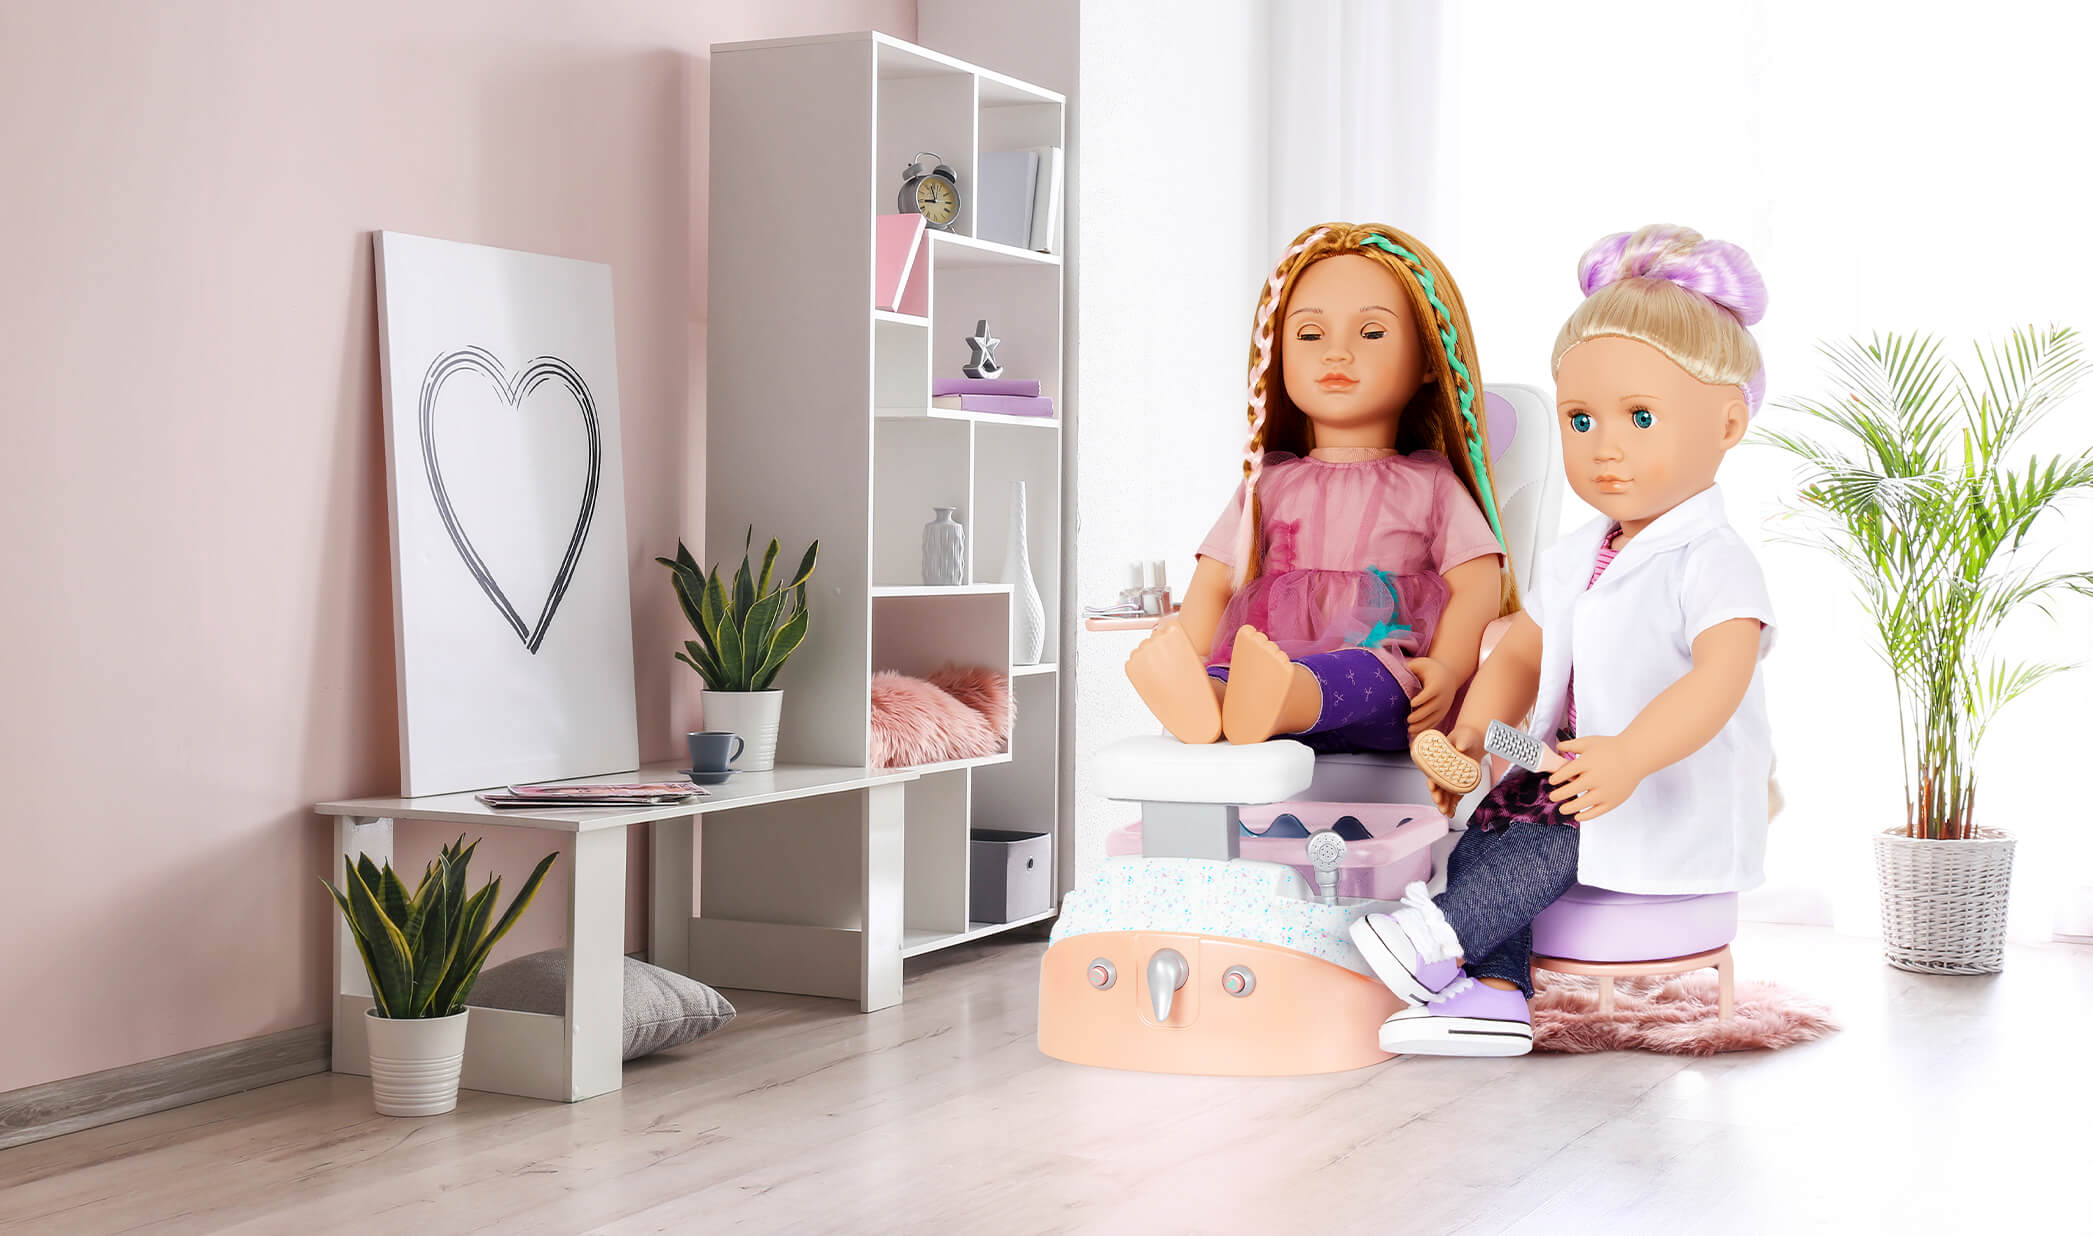 Dolls, Furniture & Accessories for Girls | Our Generation